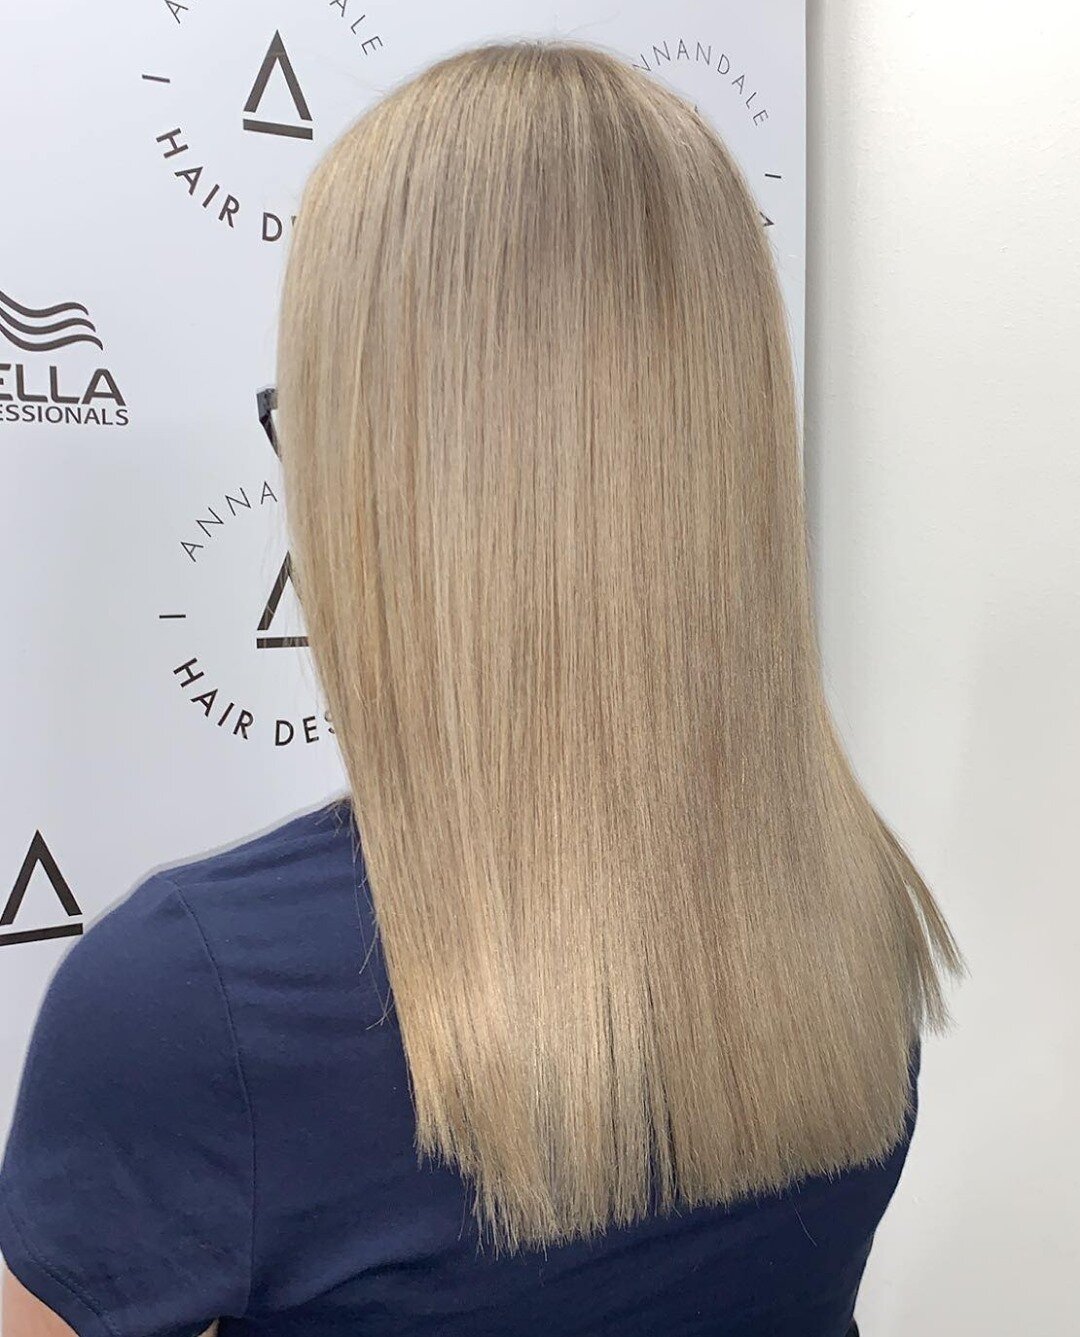 The key to keeping your blonde hair strong and healthy is in-salon treatments!⁠ 💫💁🏼&zwj;♀️⁠
⁠
Our team have access to the best of the best treatments, perfectly curated for your individual hair needs.⁠
⁠
.⁠
.⁠
.⁠
⁠
#Hair #AnnandaleHairDesign #Town